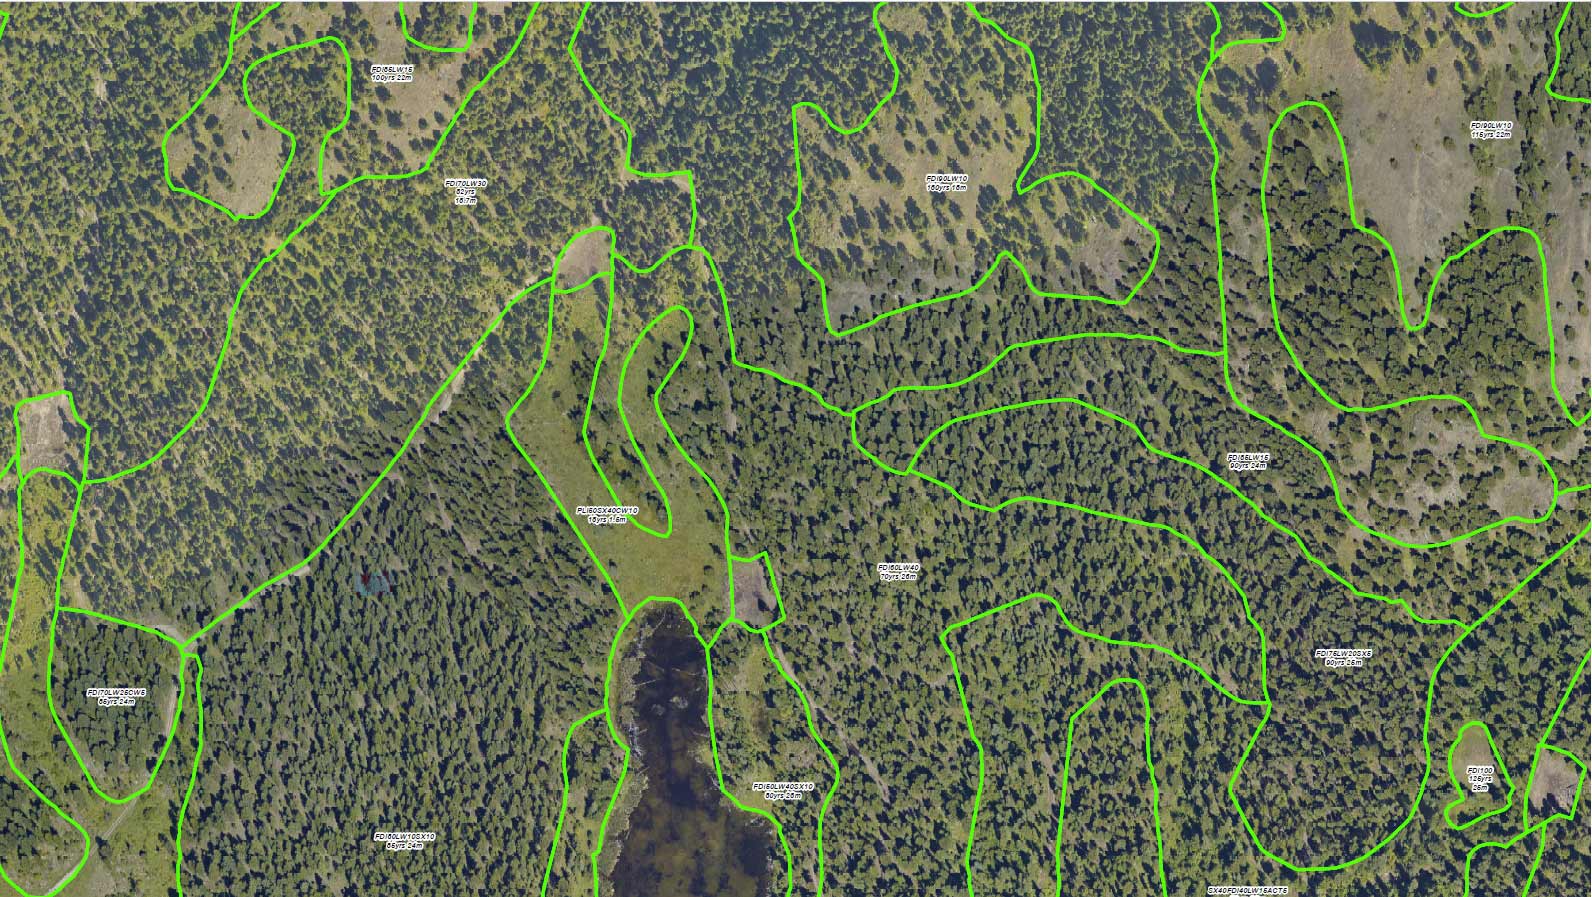 Sample of VRI map of landscape from above